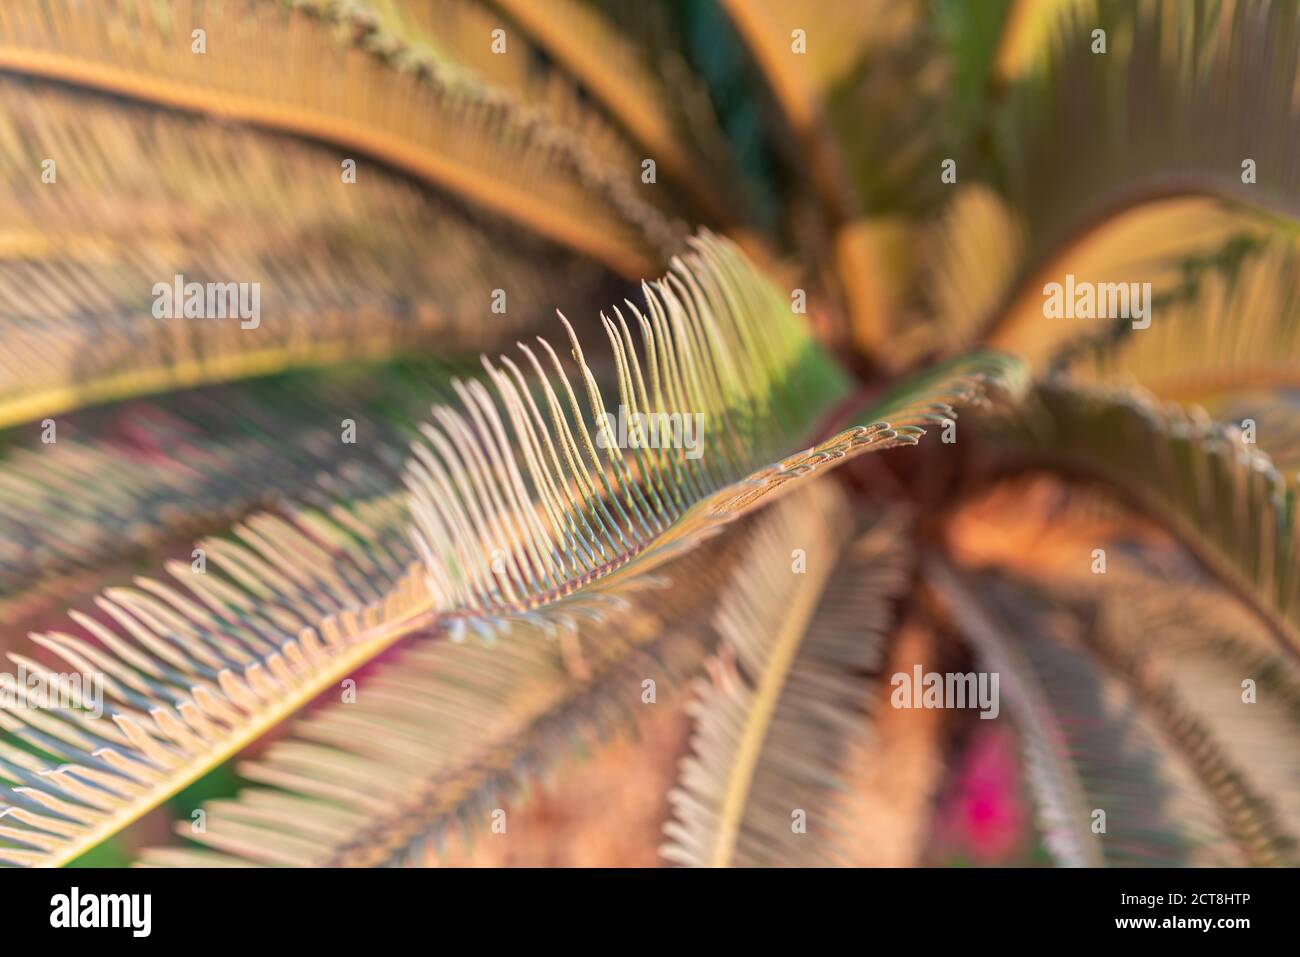 Abstract Palm Tree Details Blurred Background. Sunset. Stock Photo